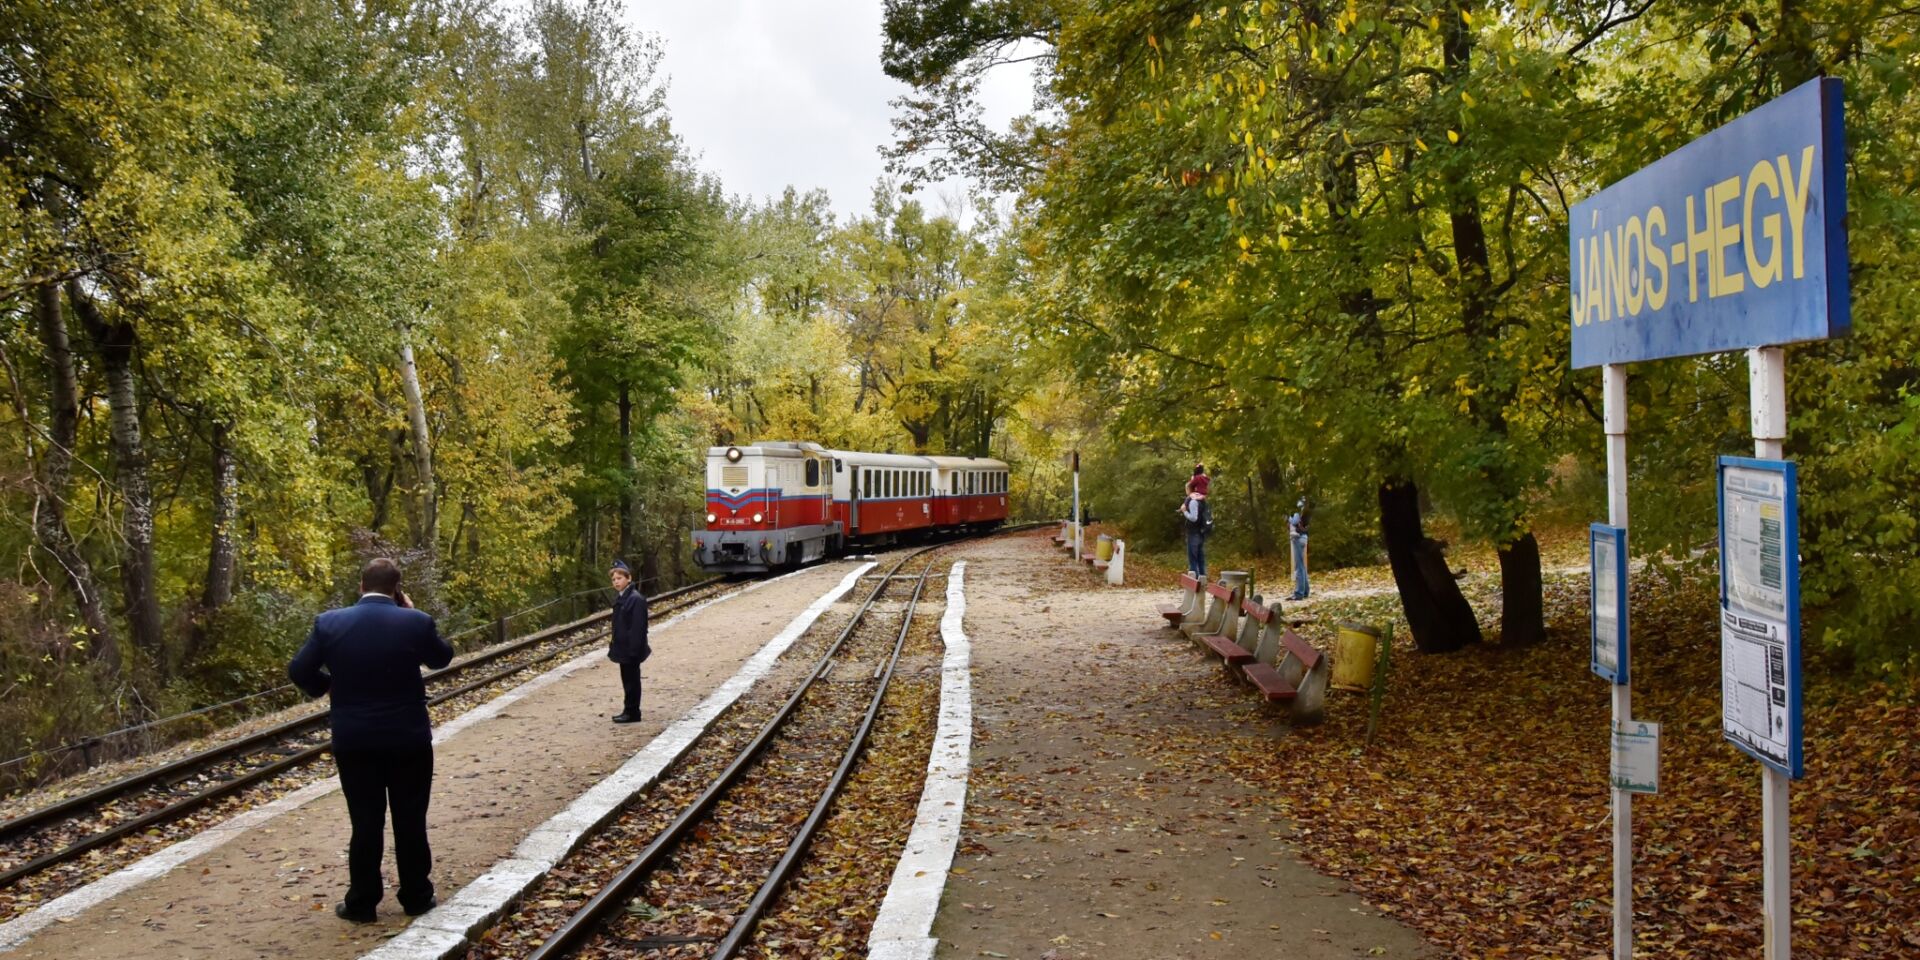 Train pulls into the platform at János-hegy in the middle of the forest in the Buda Hills